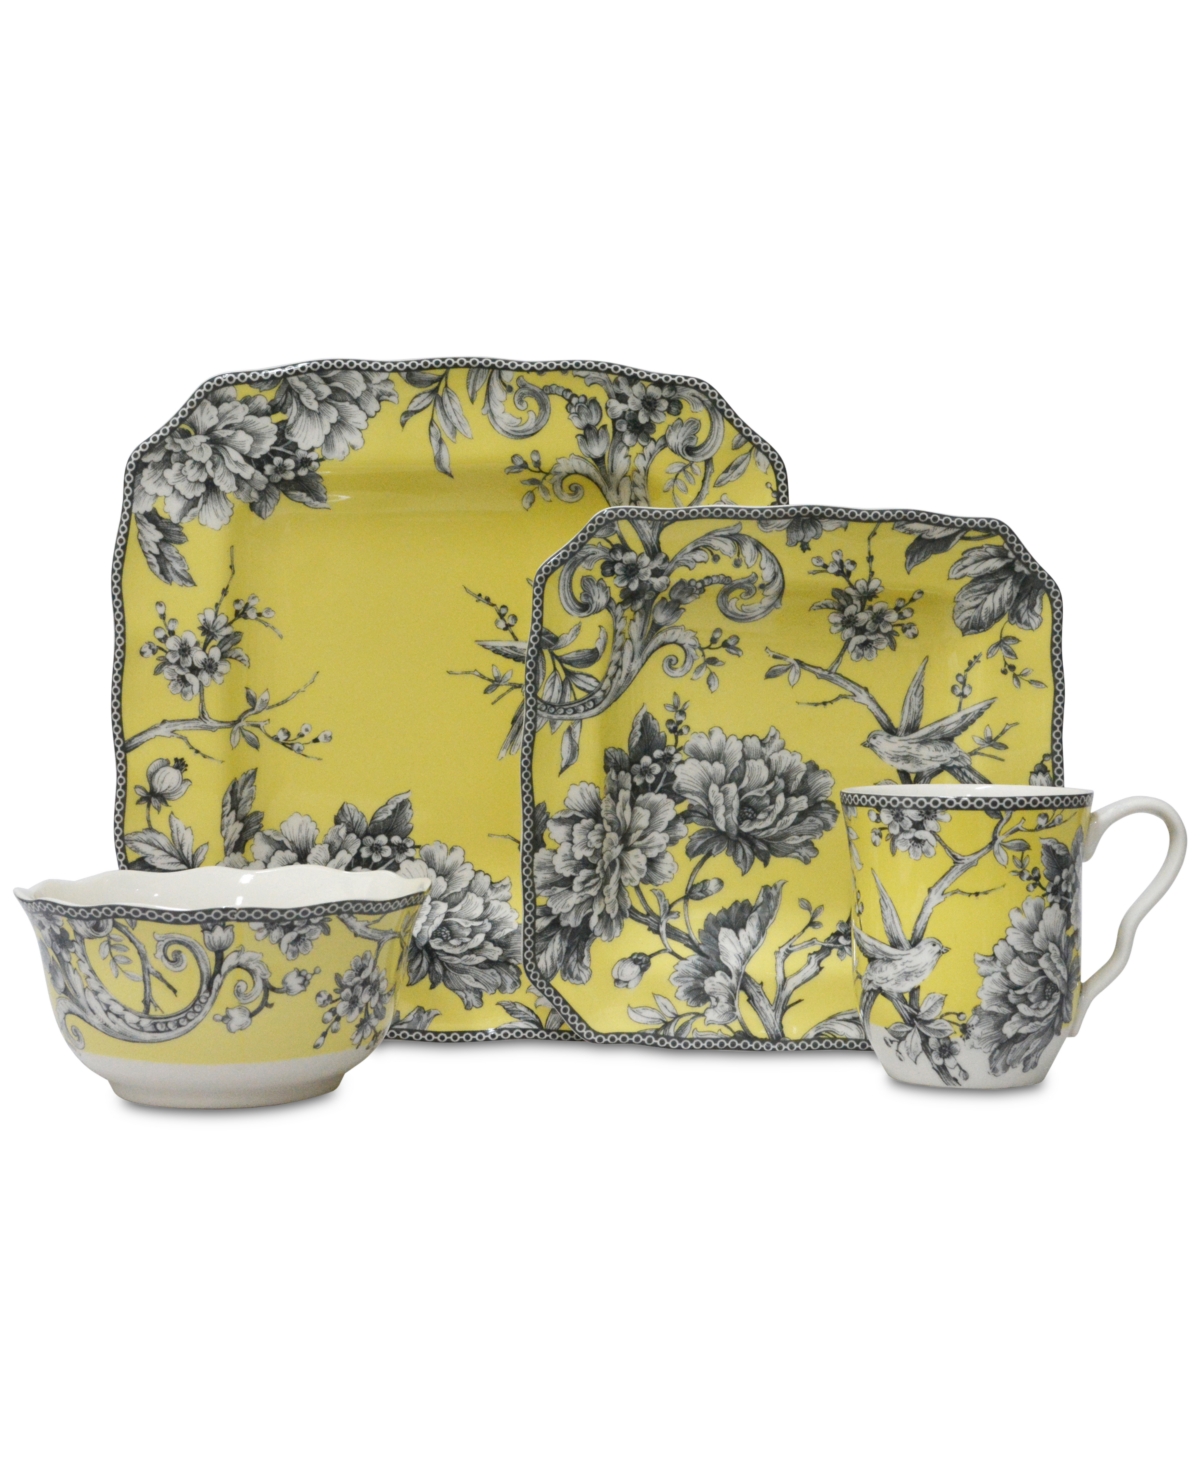 Adelaide Woodland 16-Pc. Dinnerware Set, Service for 4 - Yellow